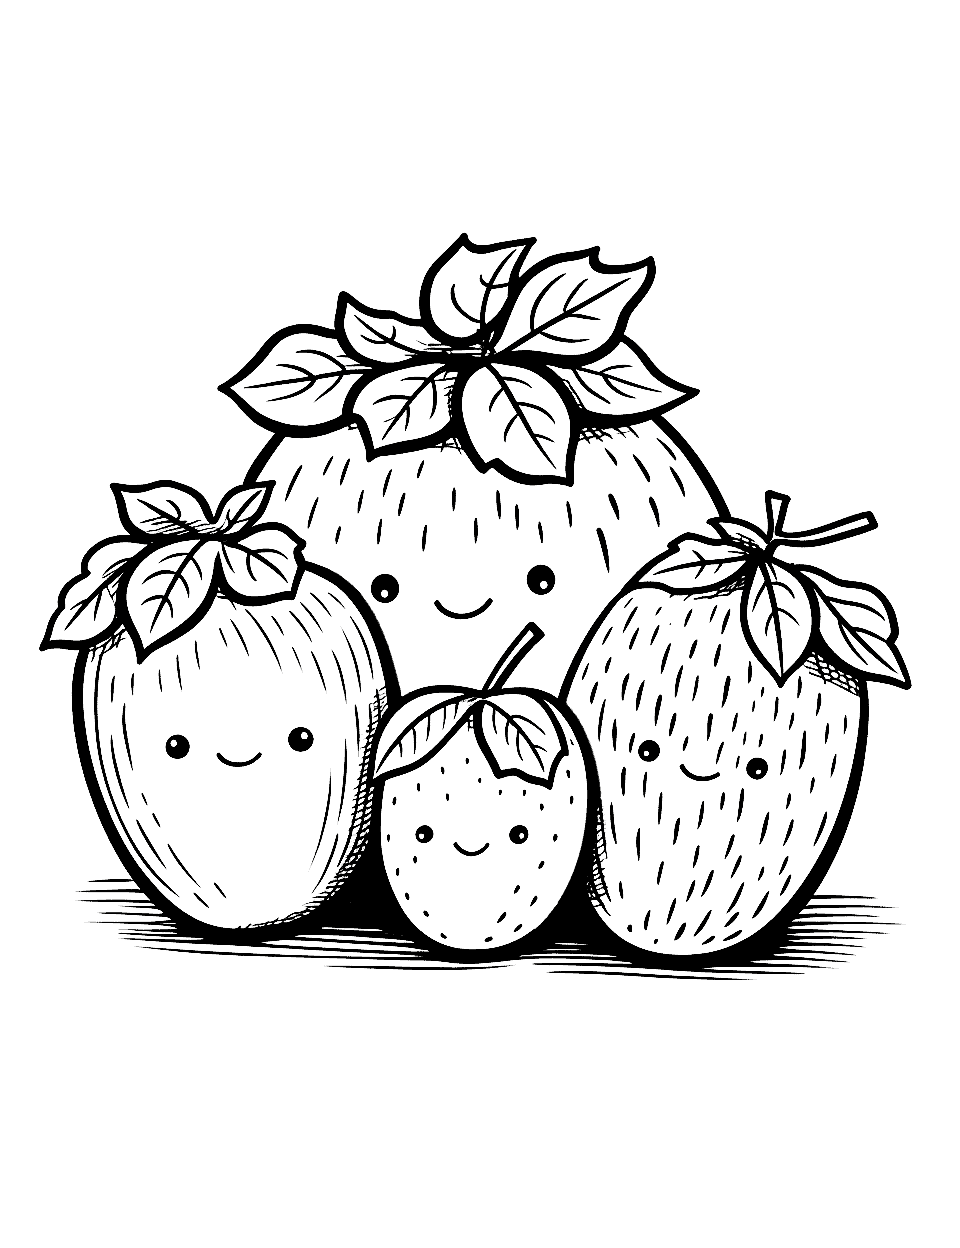 Berry Best Friends Fruit Coloring Page - A group of different berries bunched up together.